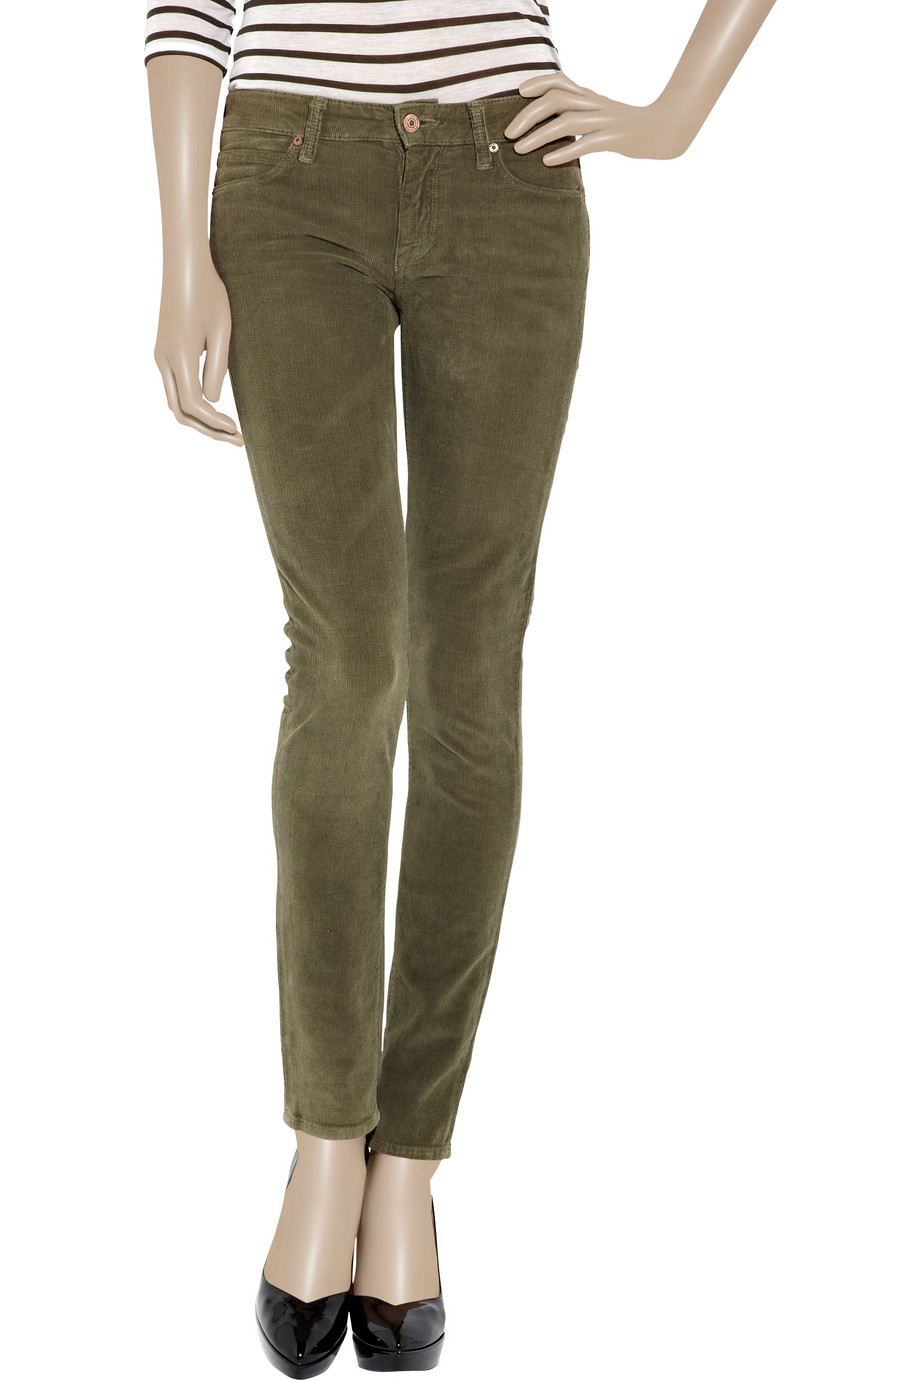 Lyst - Vince Mid-rise Corduroy Skinny Jeans in Green